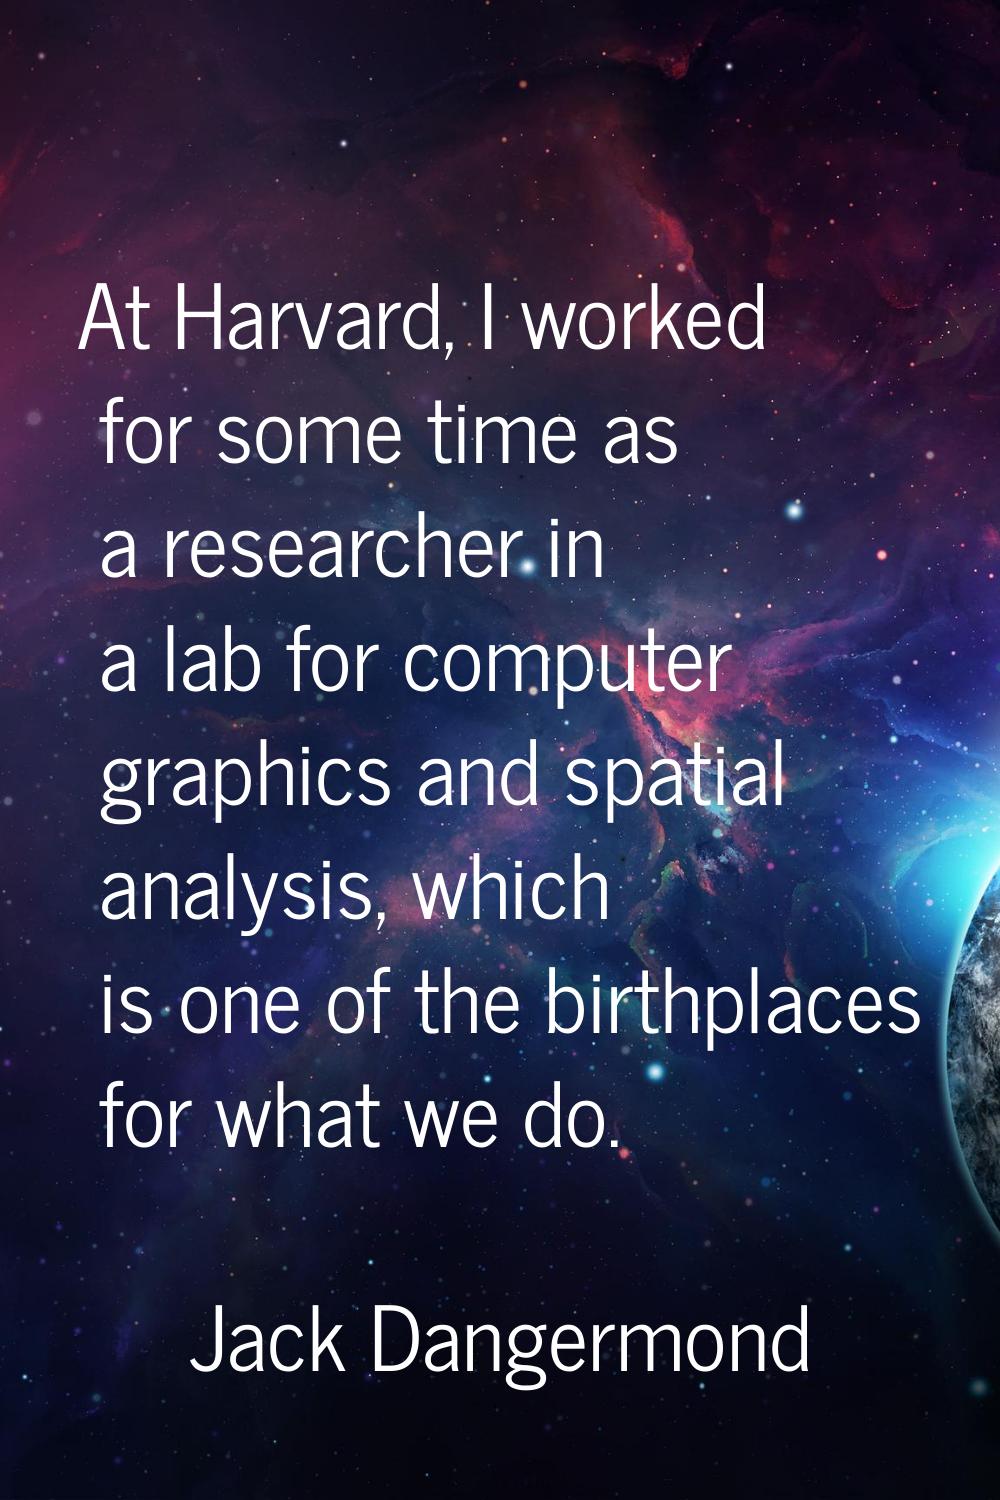 At Harvard, I worked for some time as a researcher in a lab for computer graphics and spatial analy